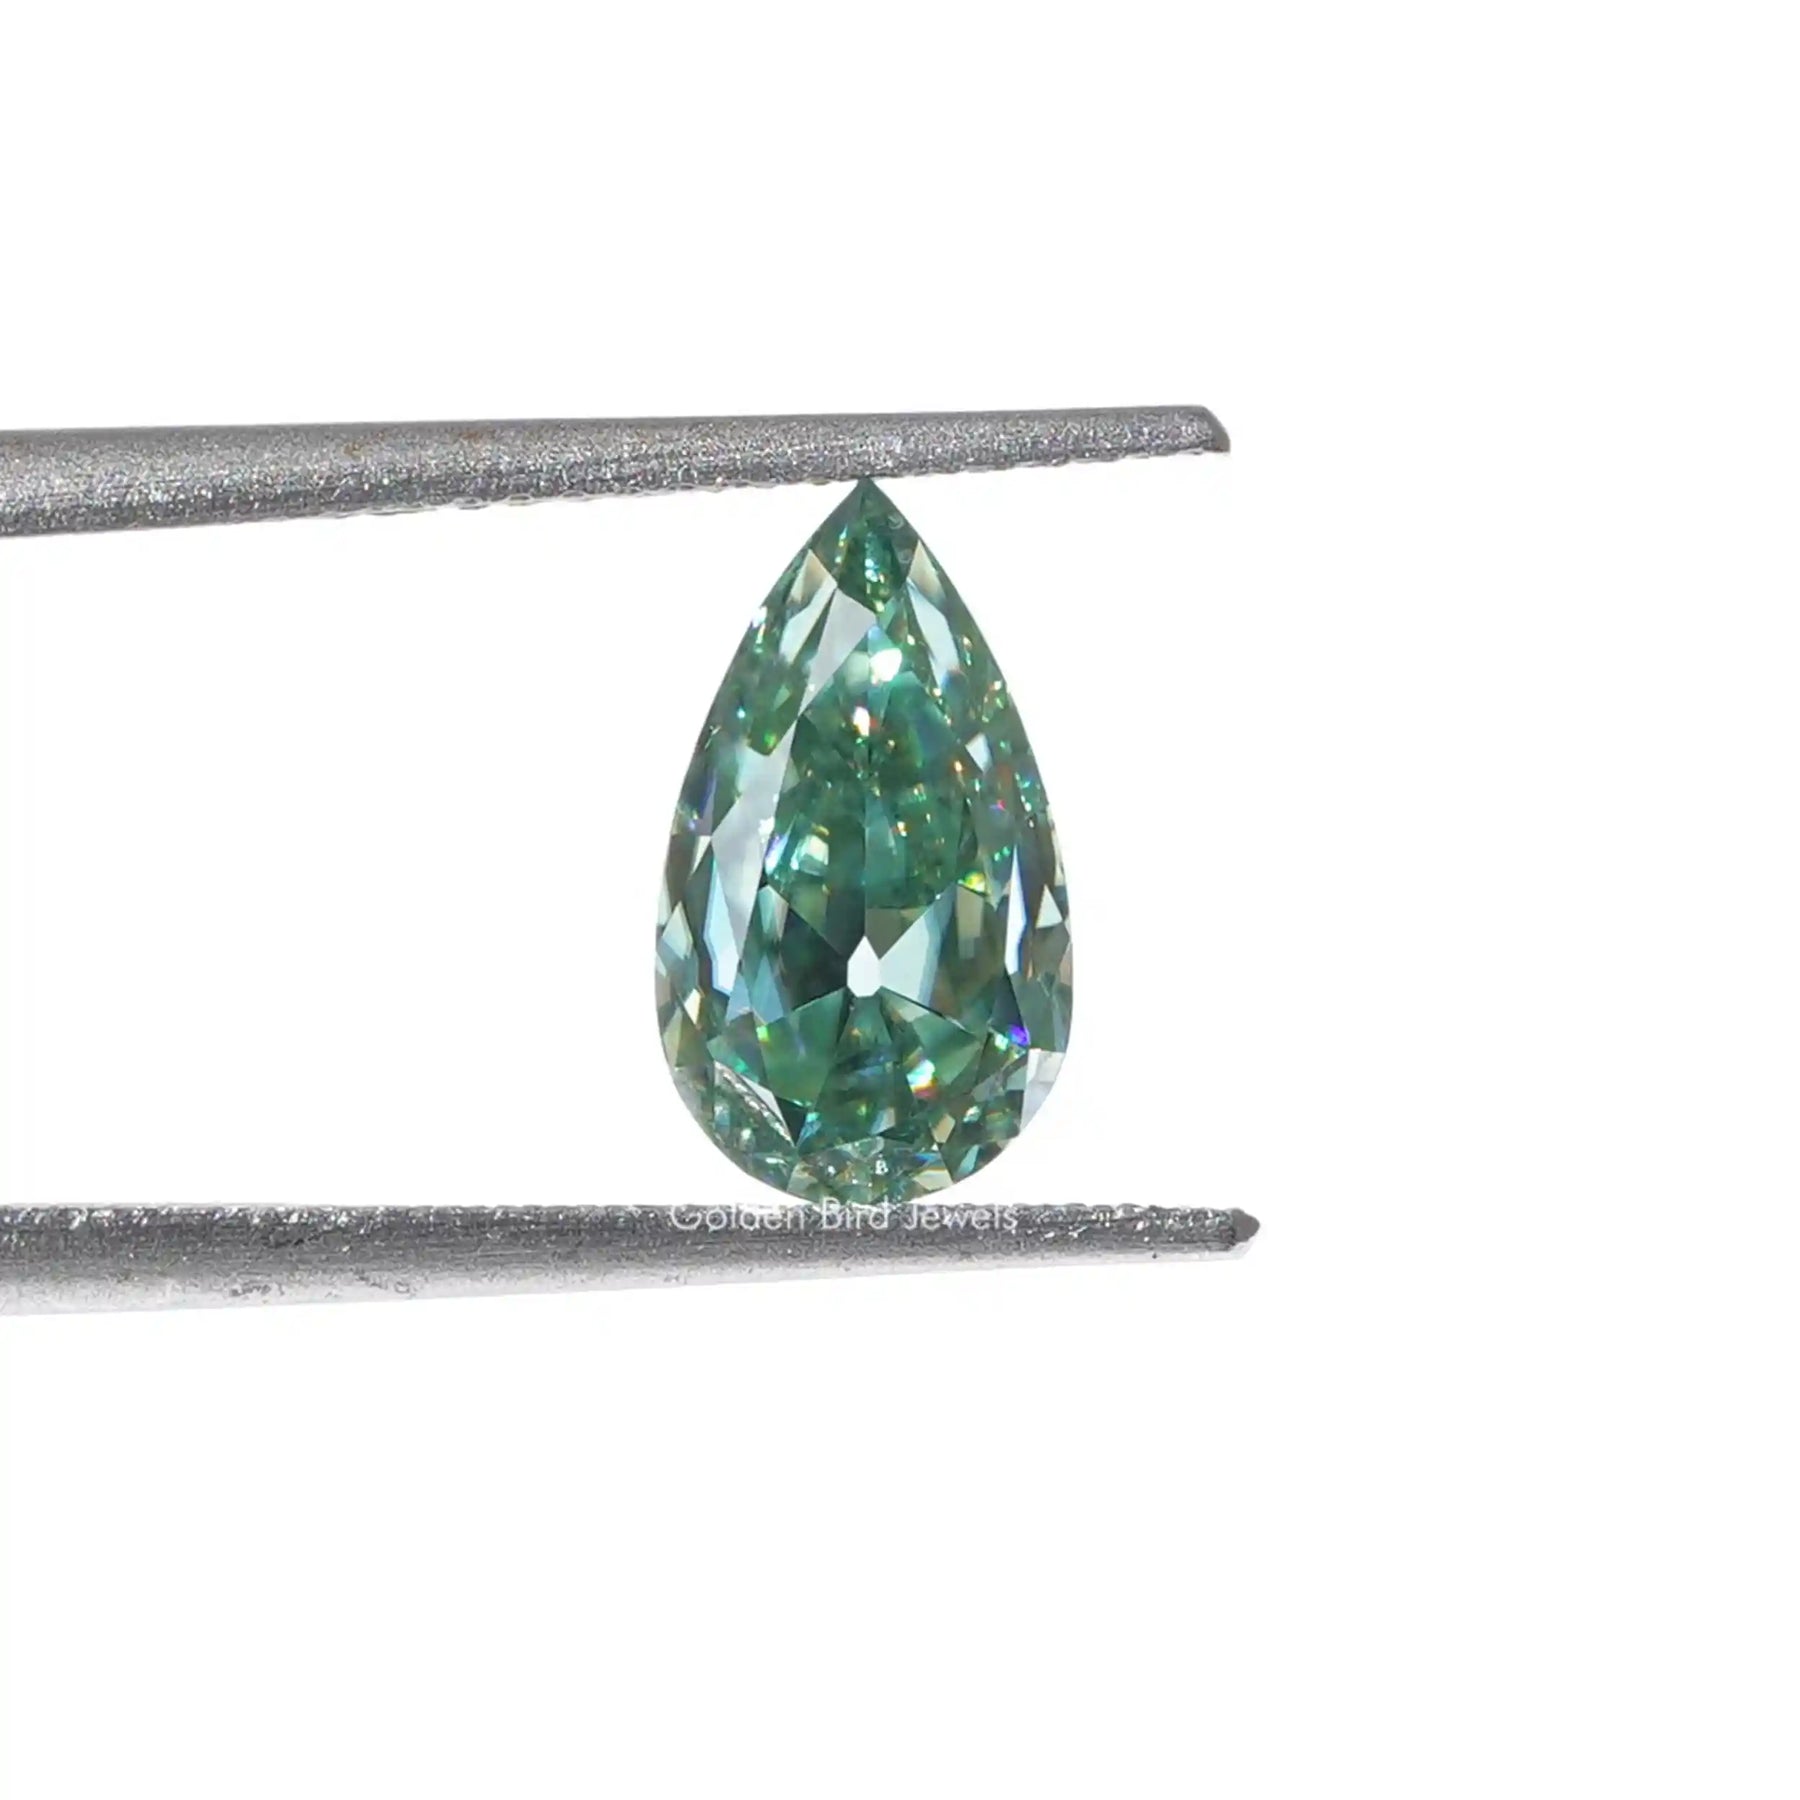 [Front view of pear cut loose moissanite crafted with blue green color]-[Golden Bird Jewels]